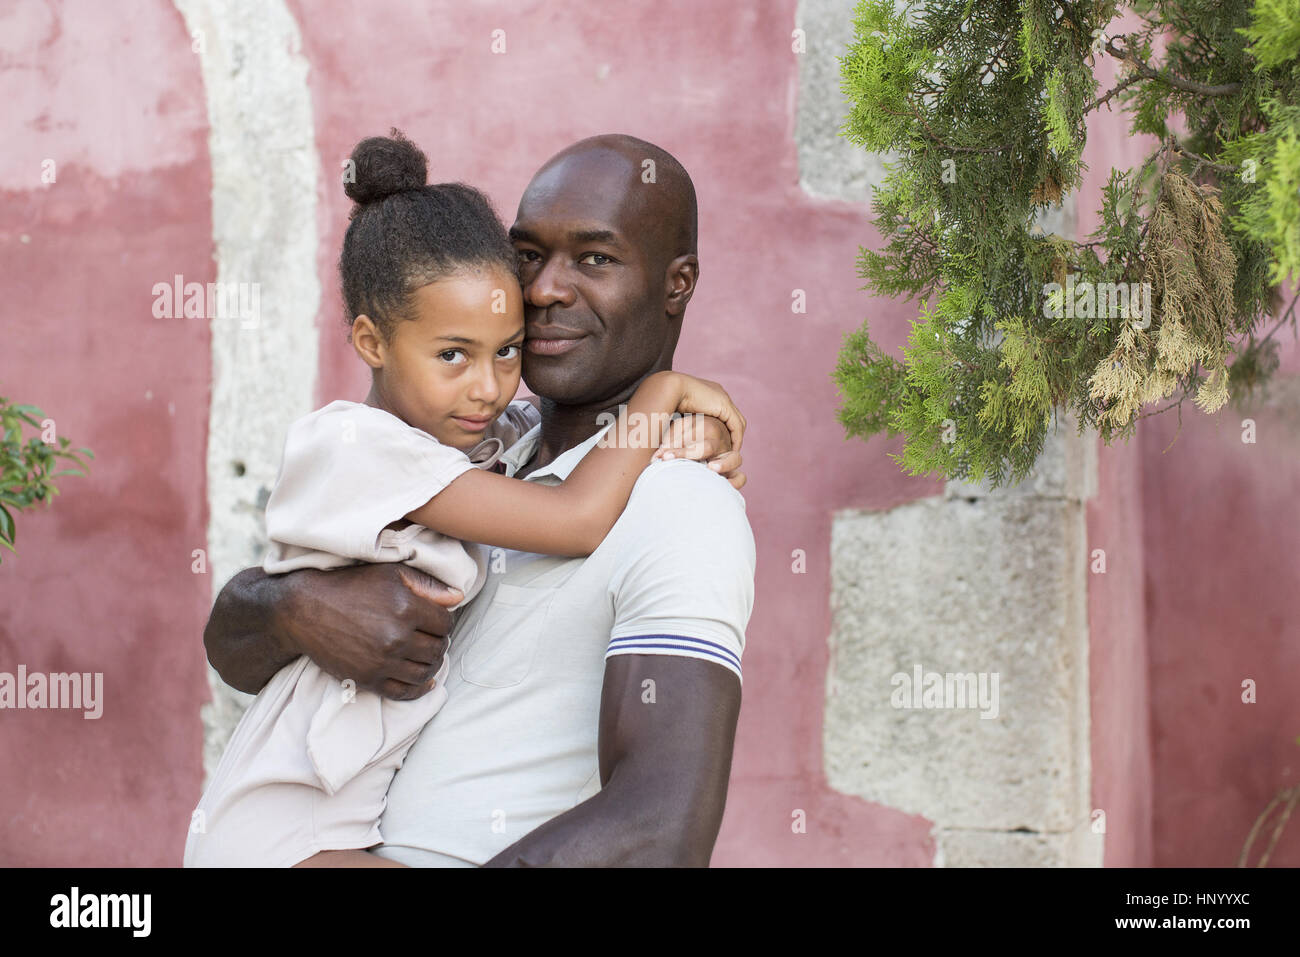 Father with young daughter, portrait Stock Photo